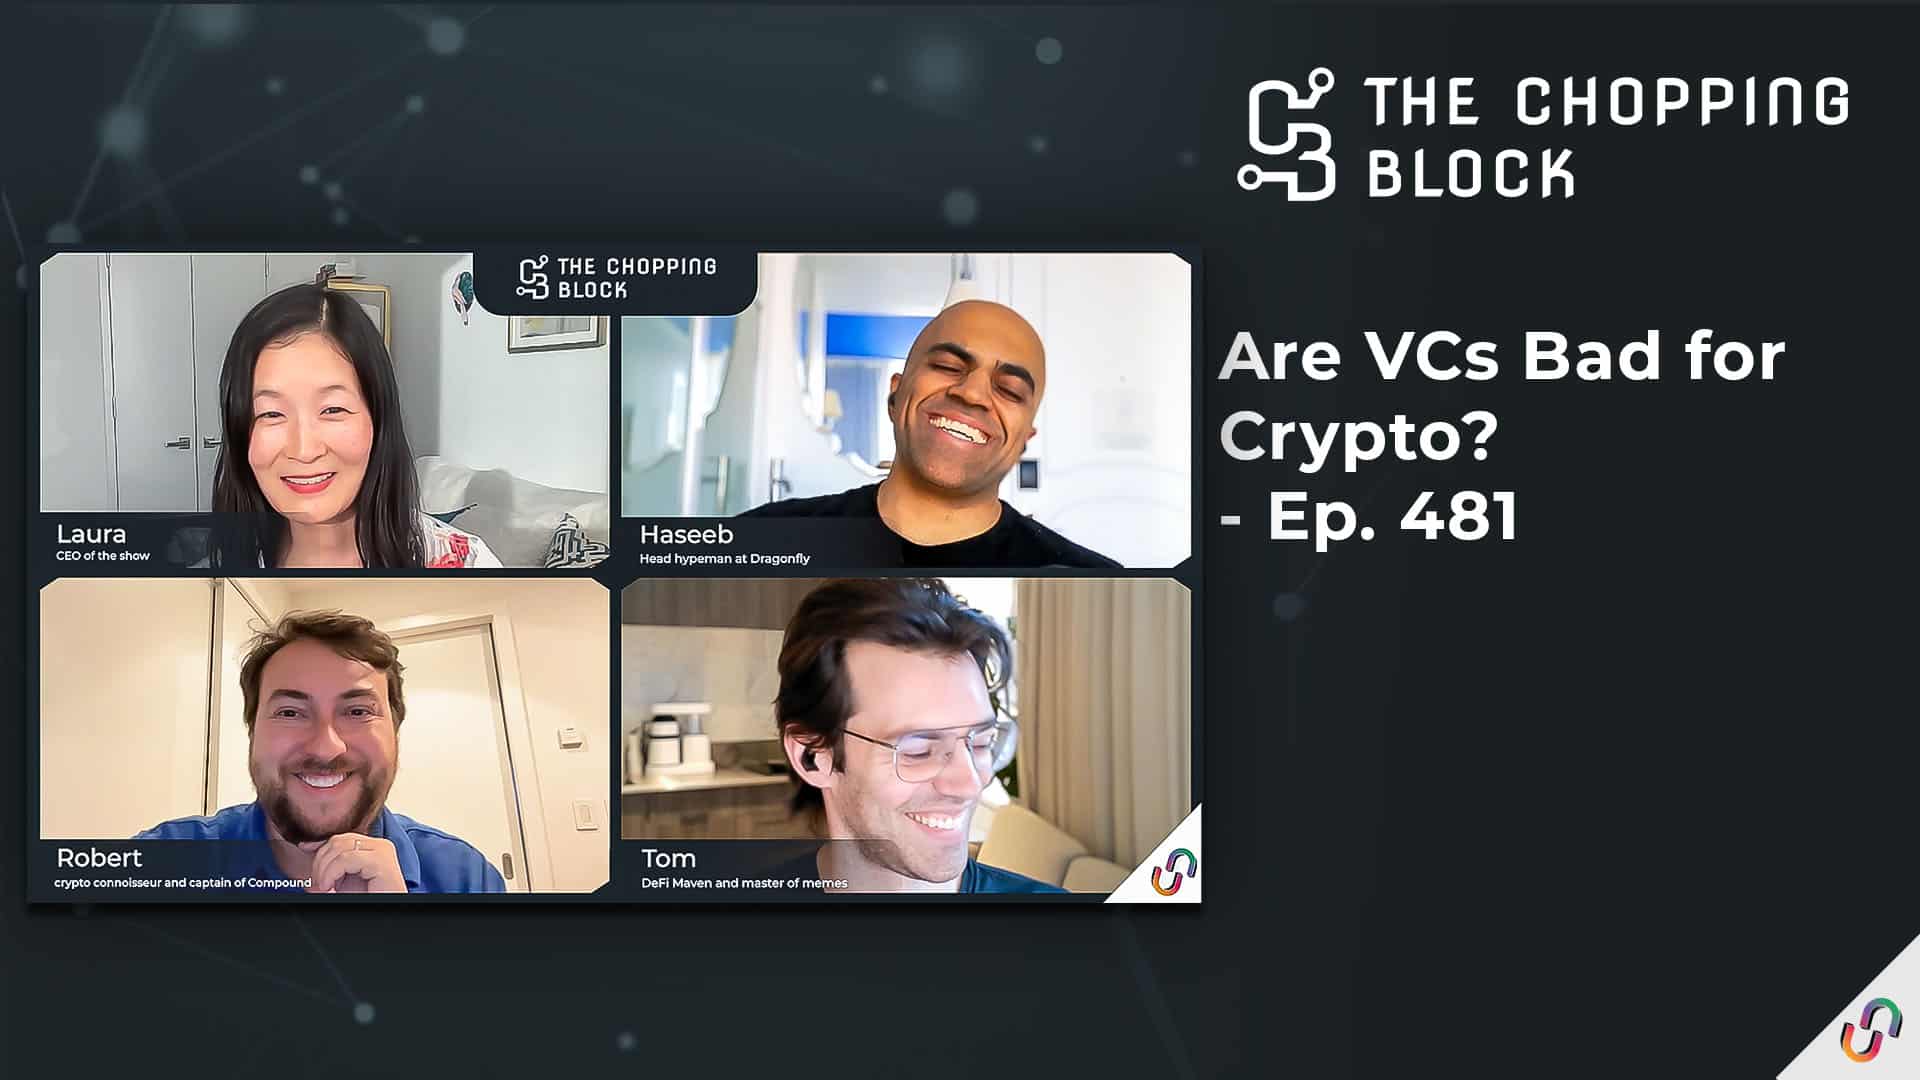 The Chopping Block: Are VCs Bad for Crypto? - Ep. 481